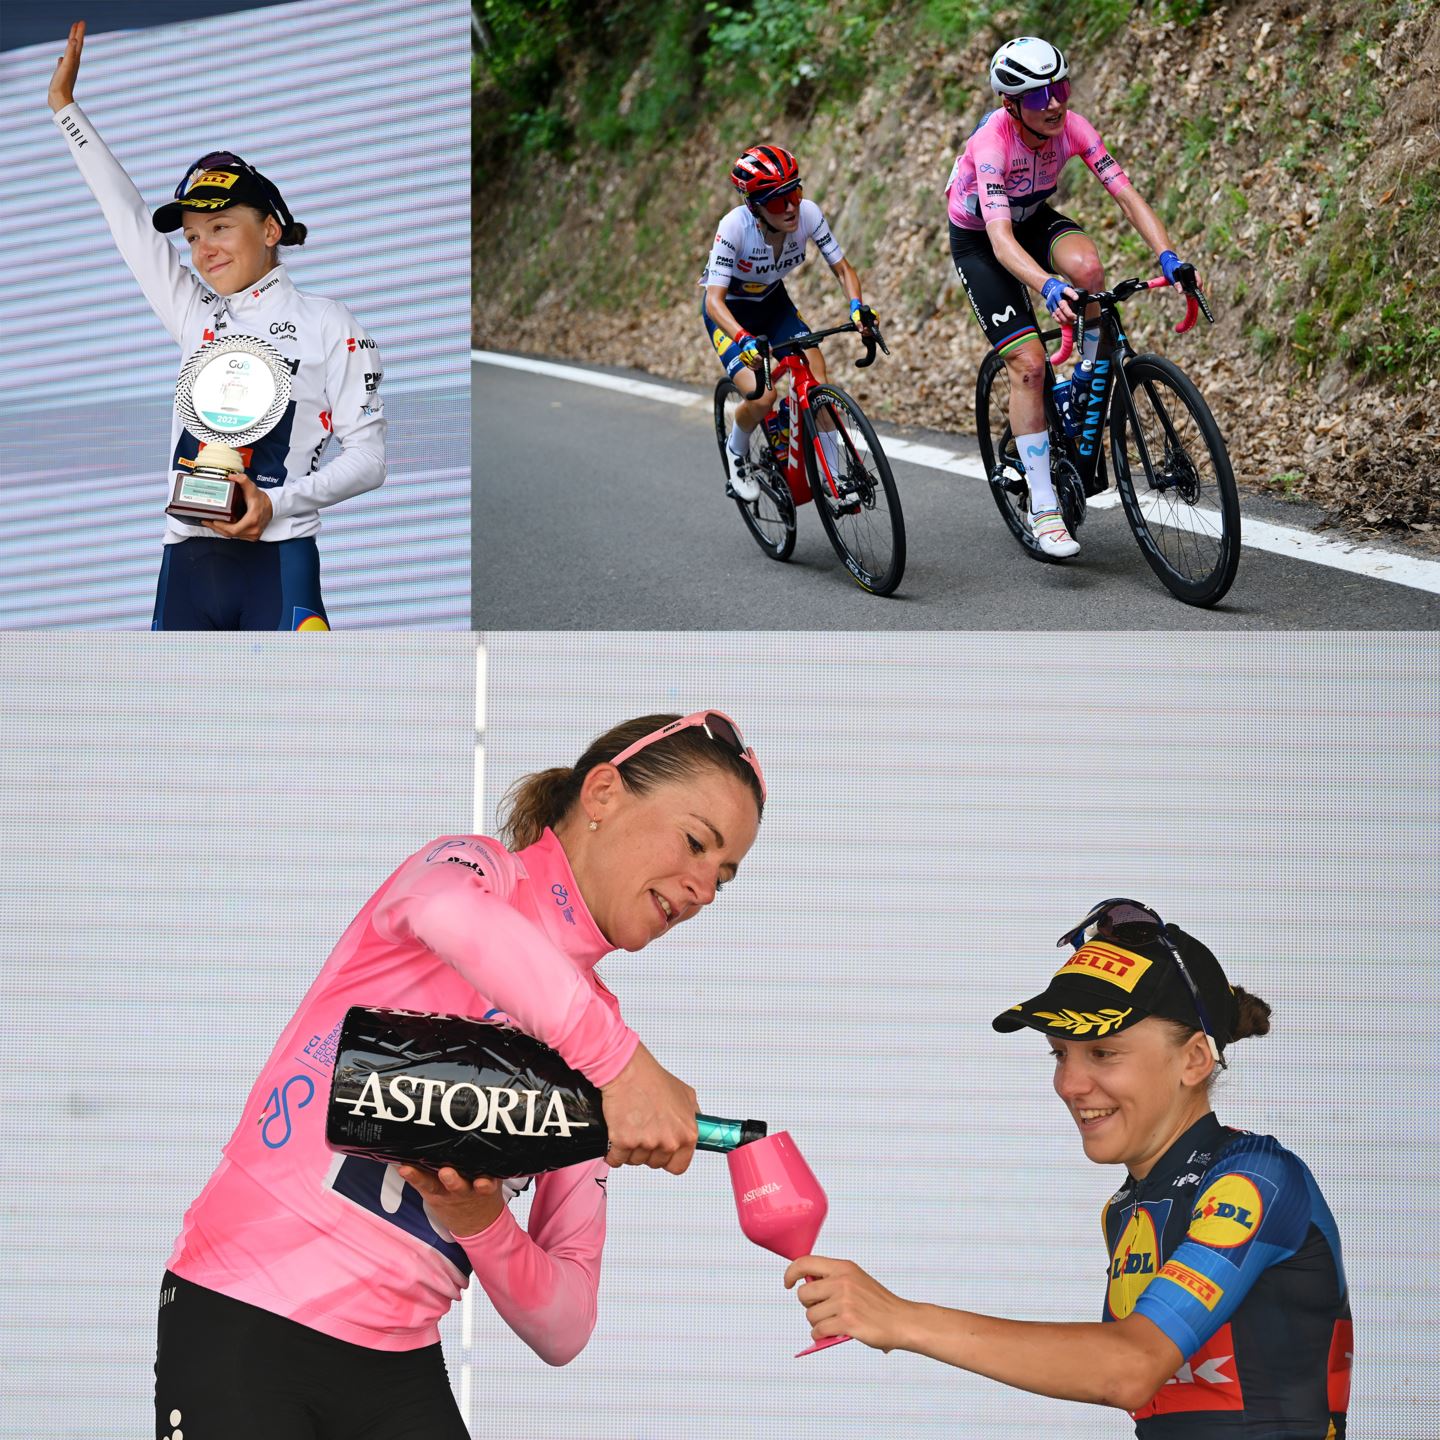 Gaia Realini got third in the General Classification as well as the Best Young Rider and Best Italian Rider jerseys.